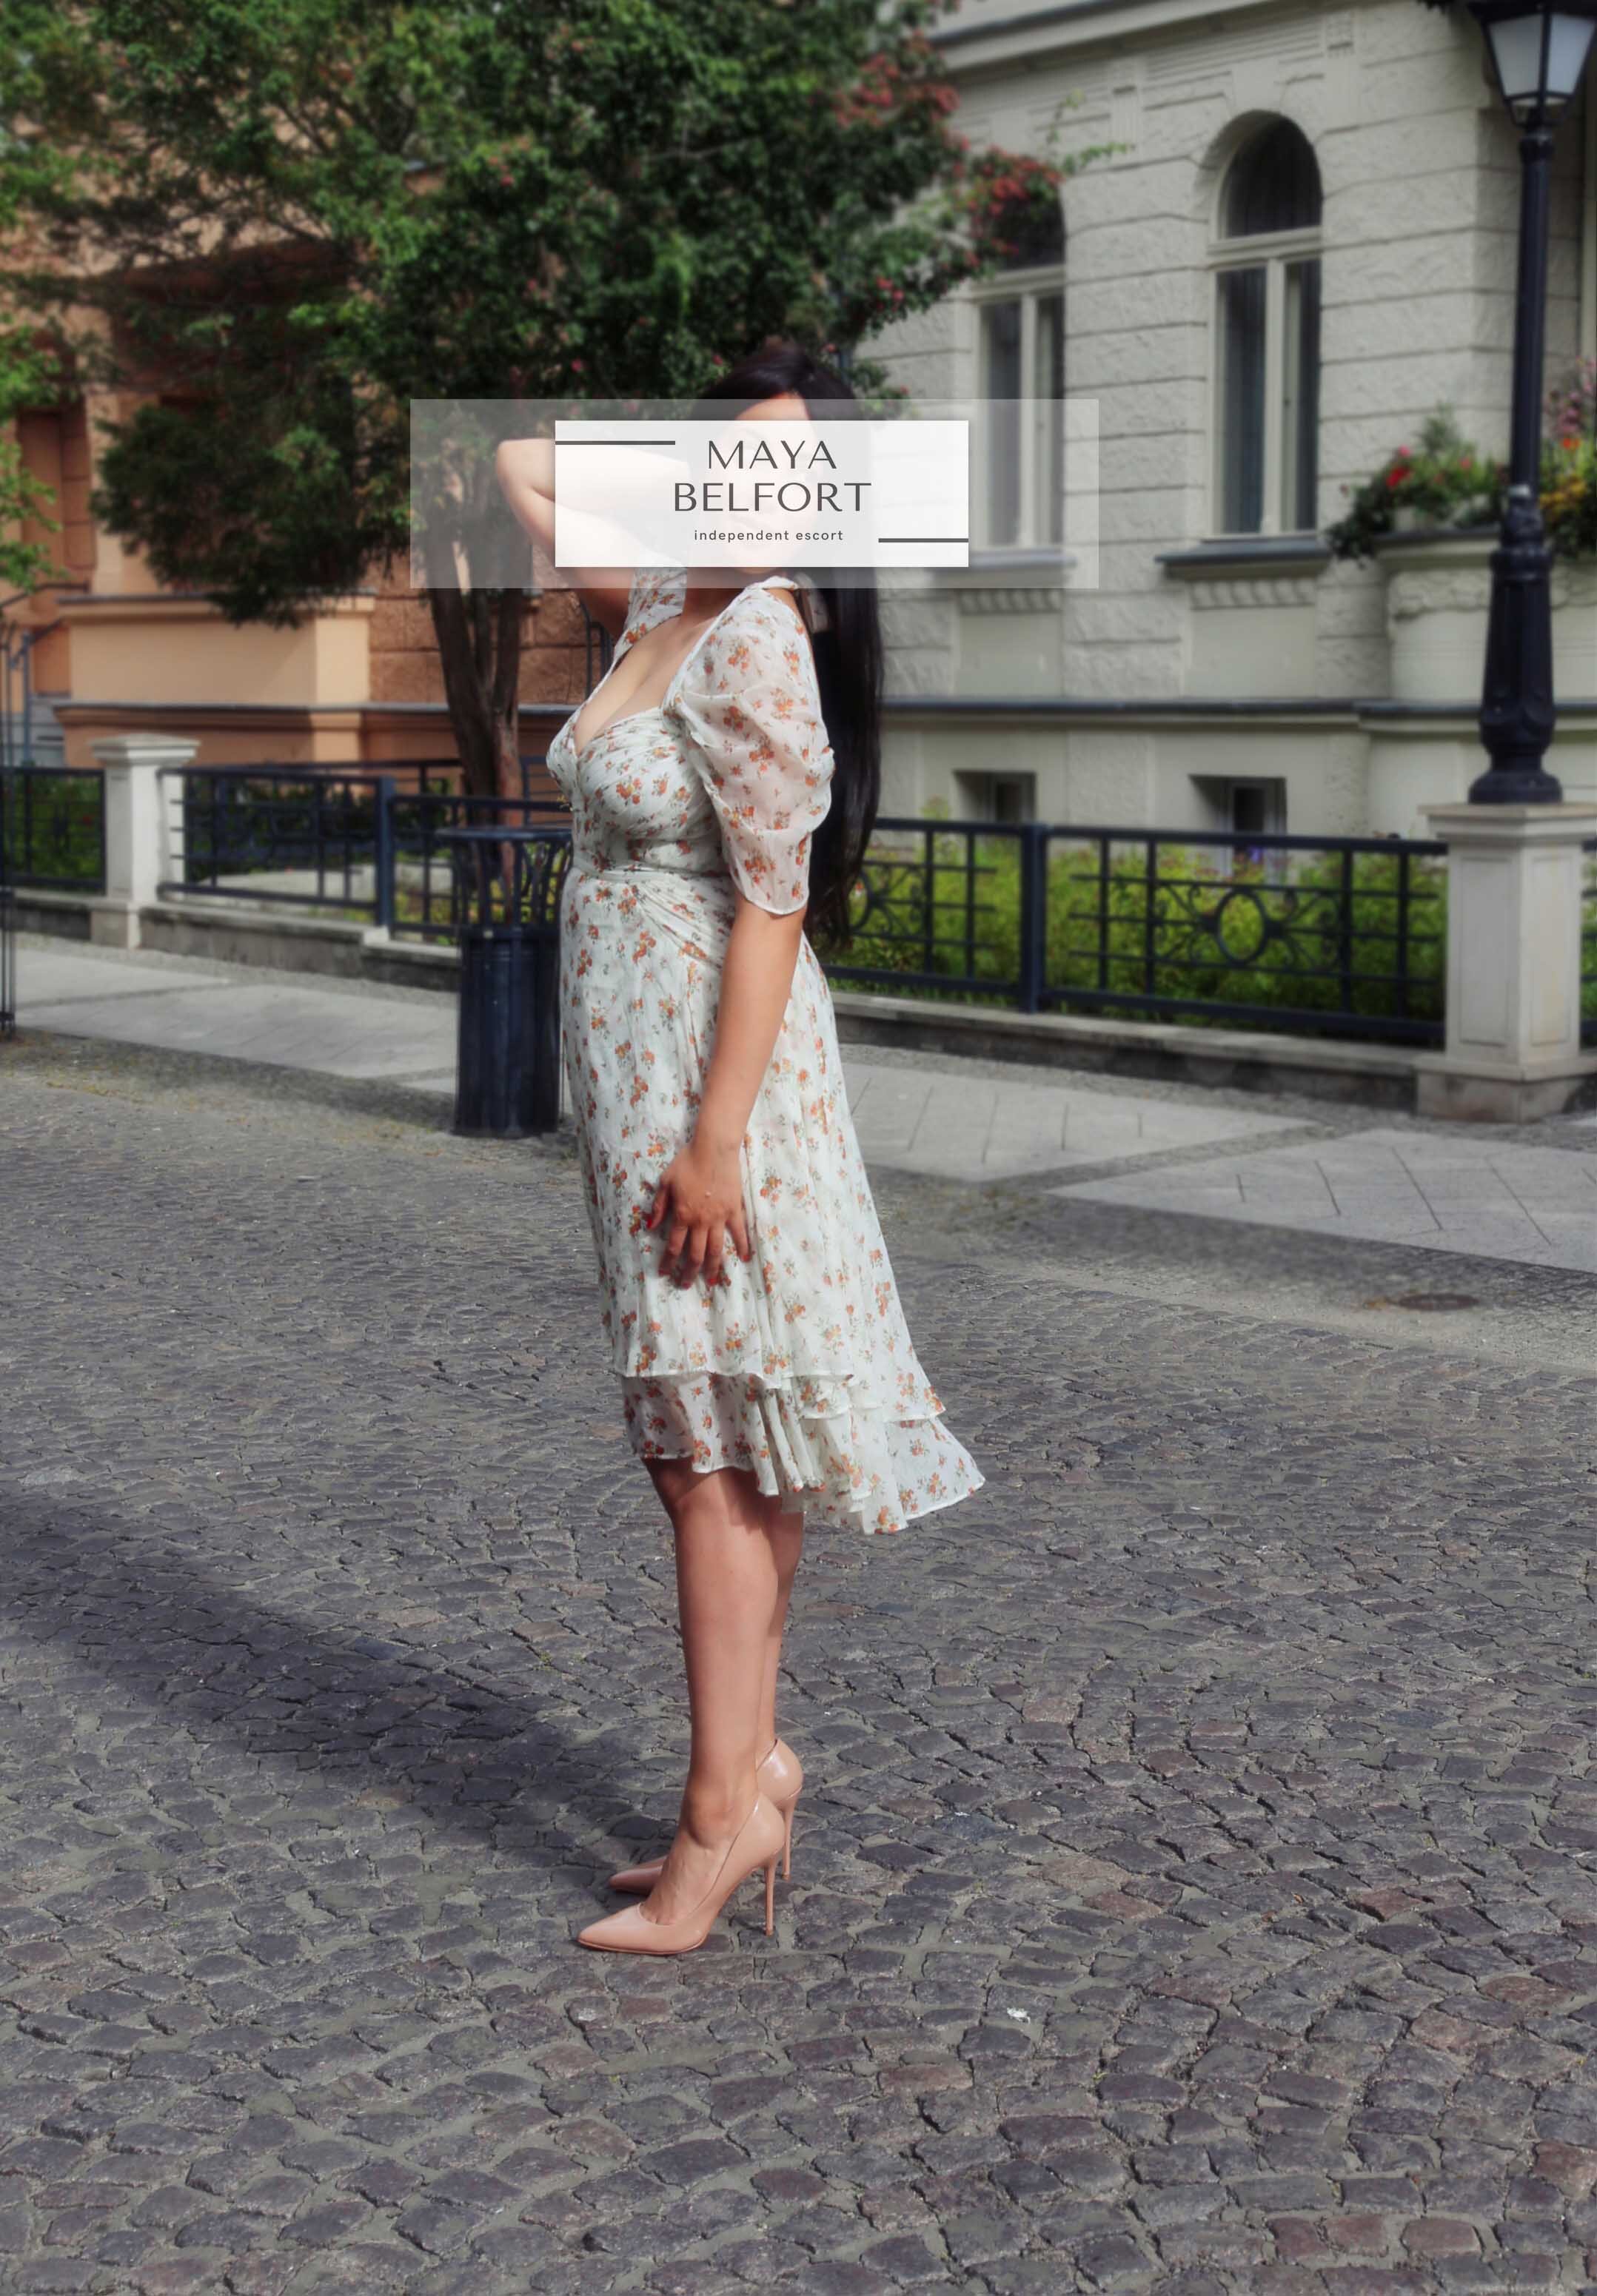 maya Belfort your escort europe stands on a pavement in a metropolis wearing a floral dress and bright pumps